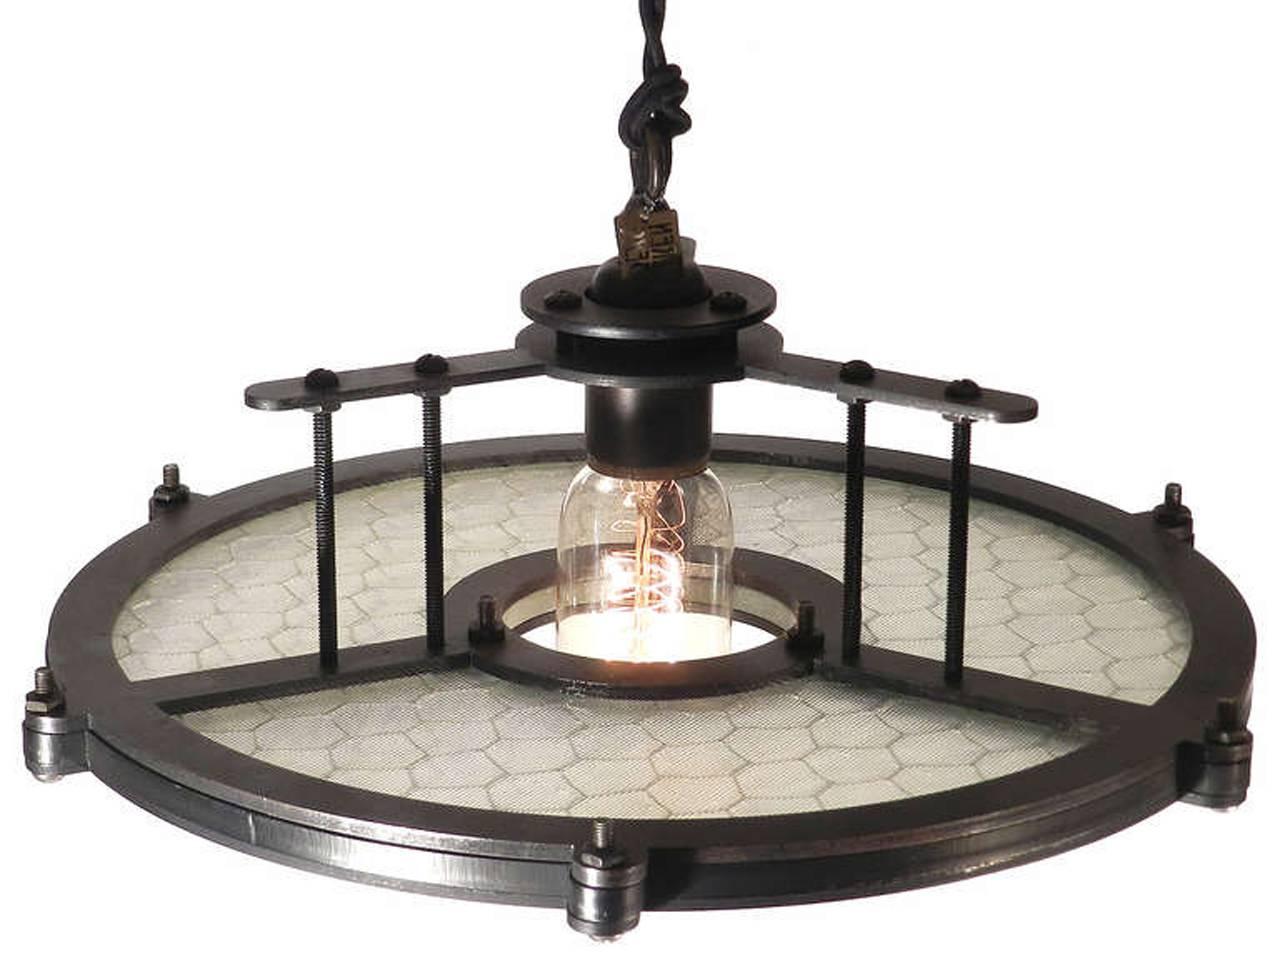 These unique 13 inch diameter pendants feature 80 year old industrial wire glass. We designed the simple iron frame to highlight the beauty of this antique utilitarian factory glass. The iron frame has an aged black finish. The socket is brass and